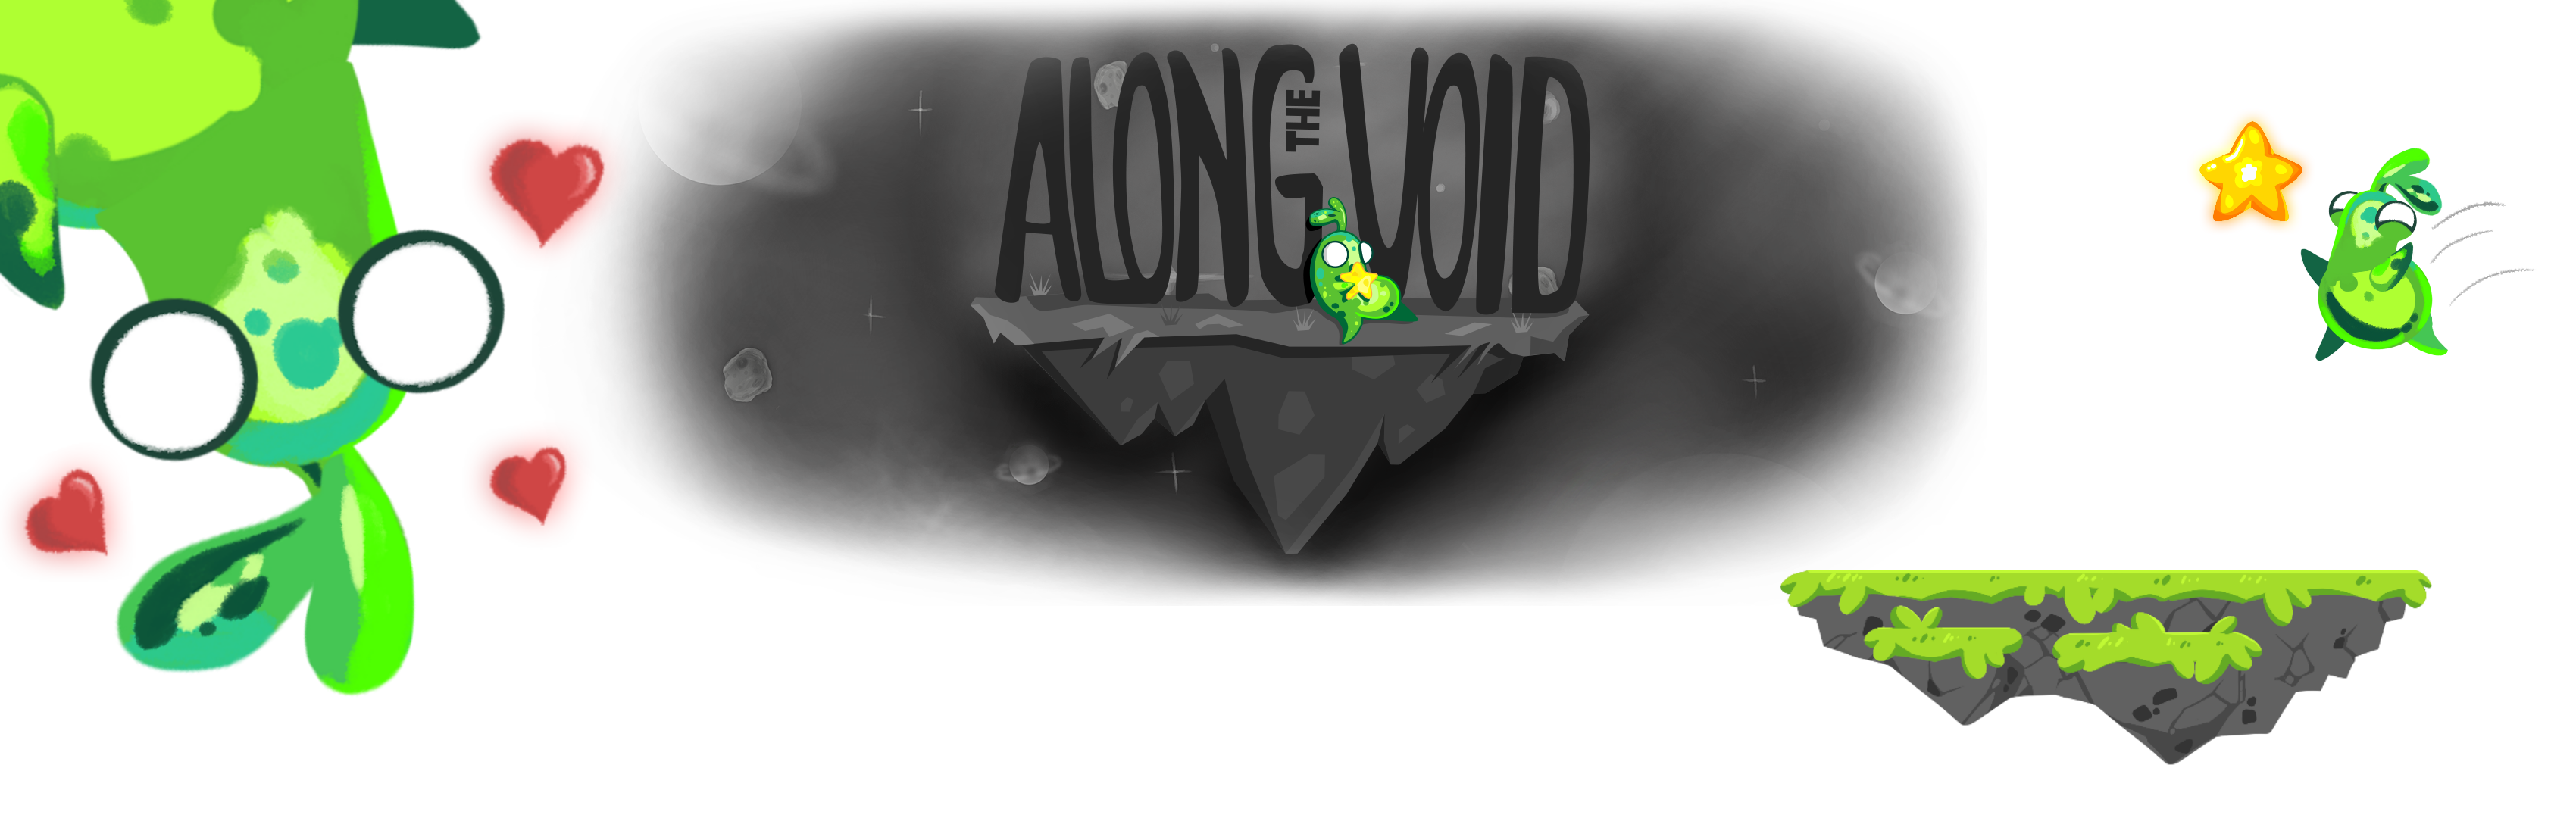 Along The Void